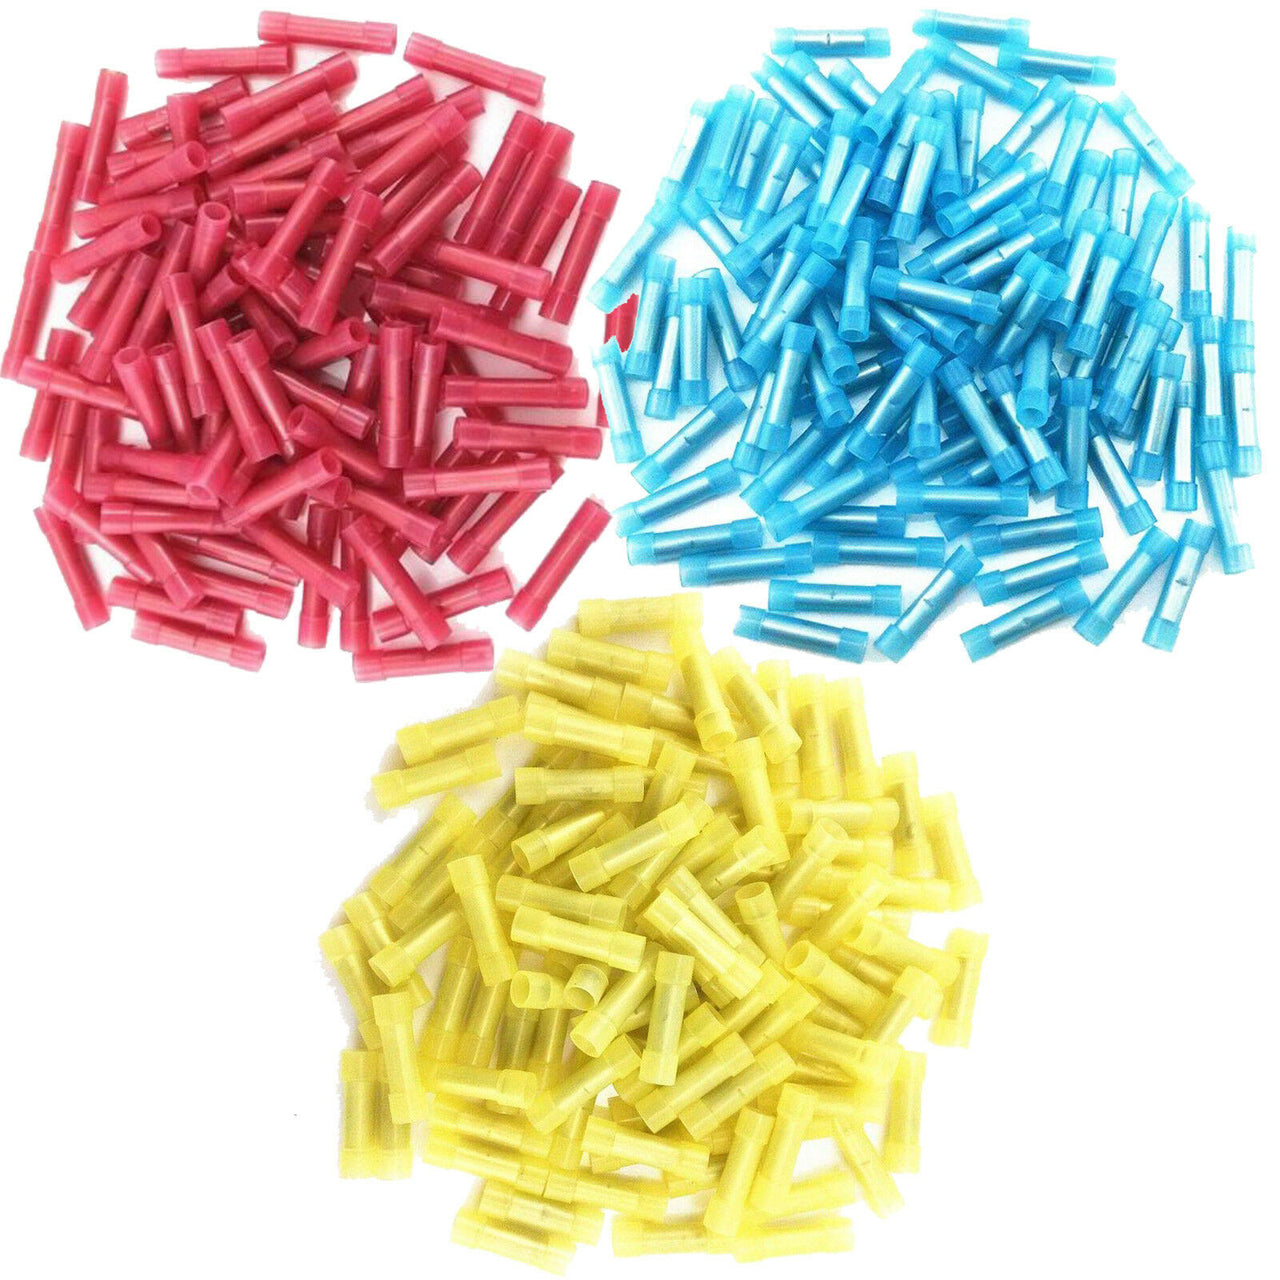 300Pcs American Terminal Butt Connectors Yellow, Blue, And Red NYLON 12-10, 16-14, And 22-18 Gauge Crimp Type (100 of each)